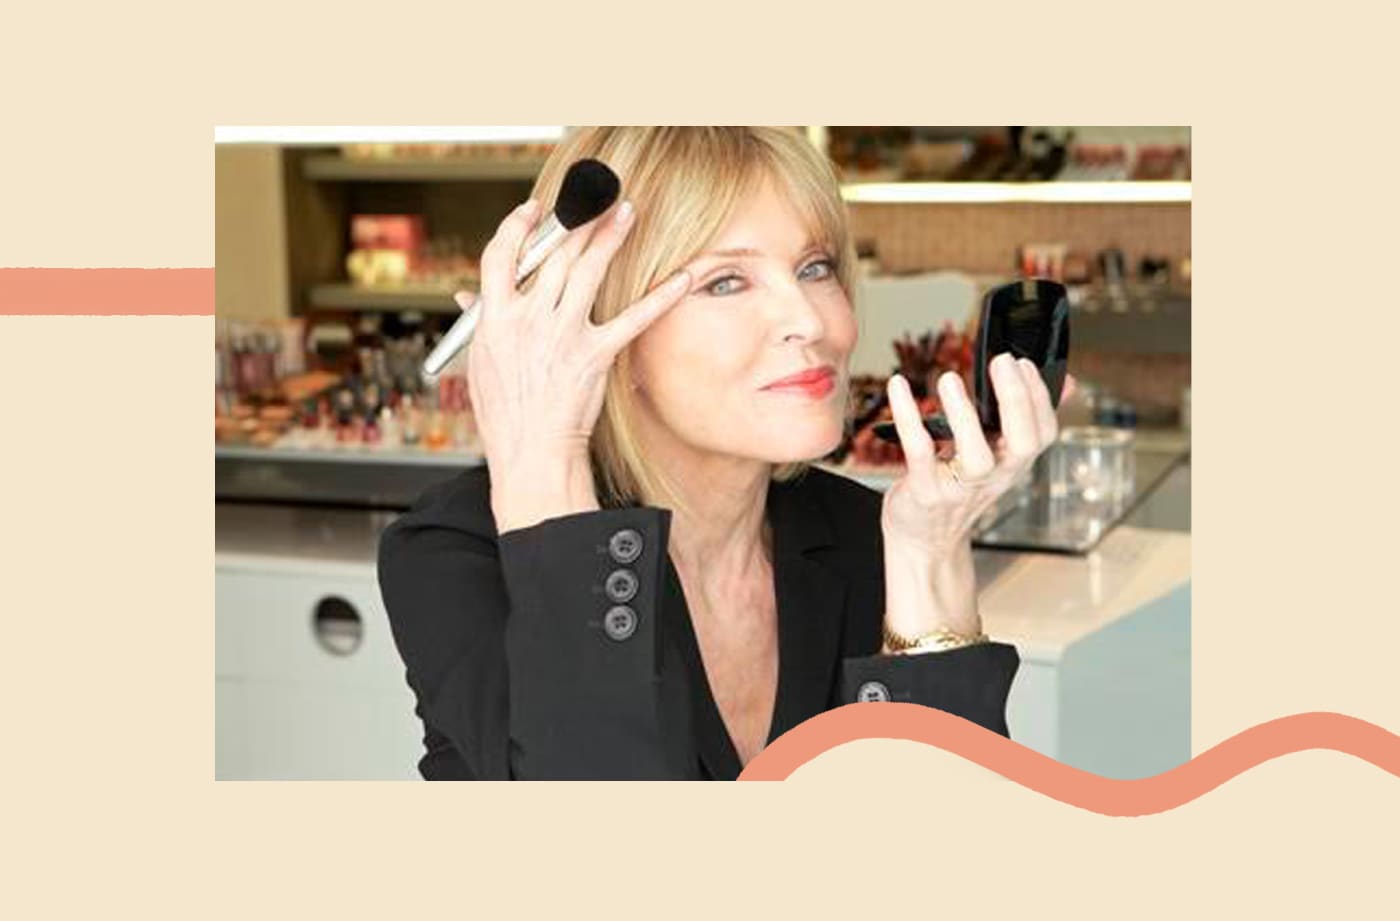 'I'm a 72-year-old Makeup Artist, and These Are My Favorite Foundations and Concealers'